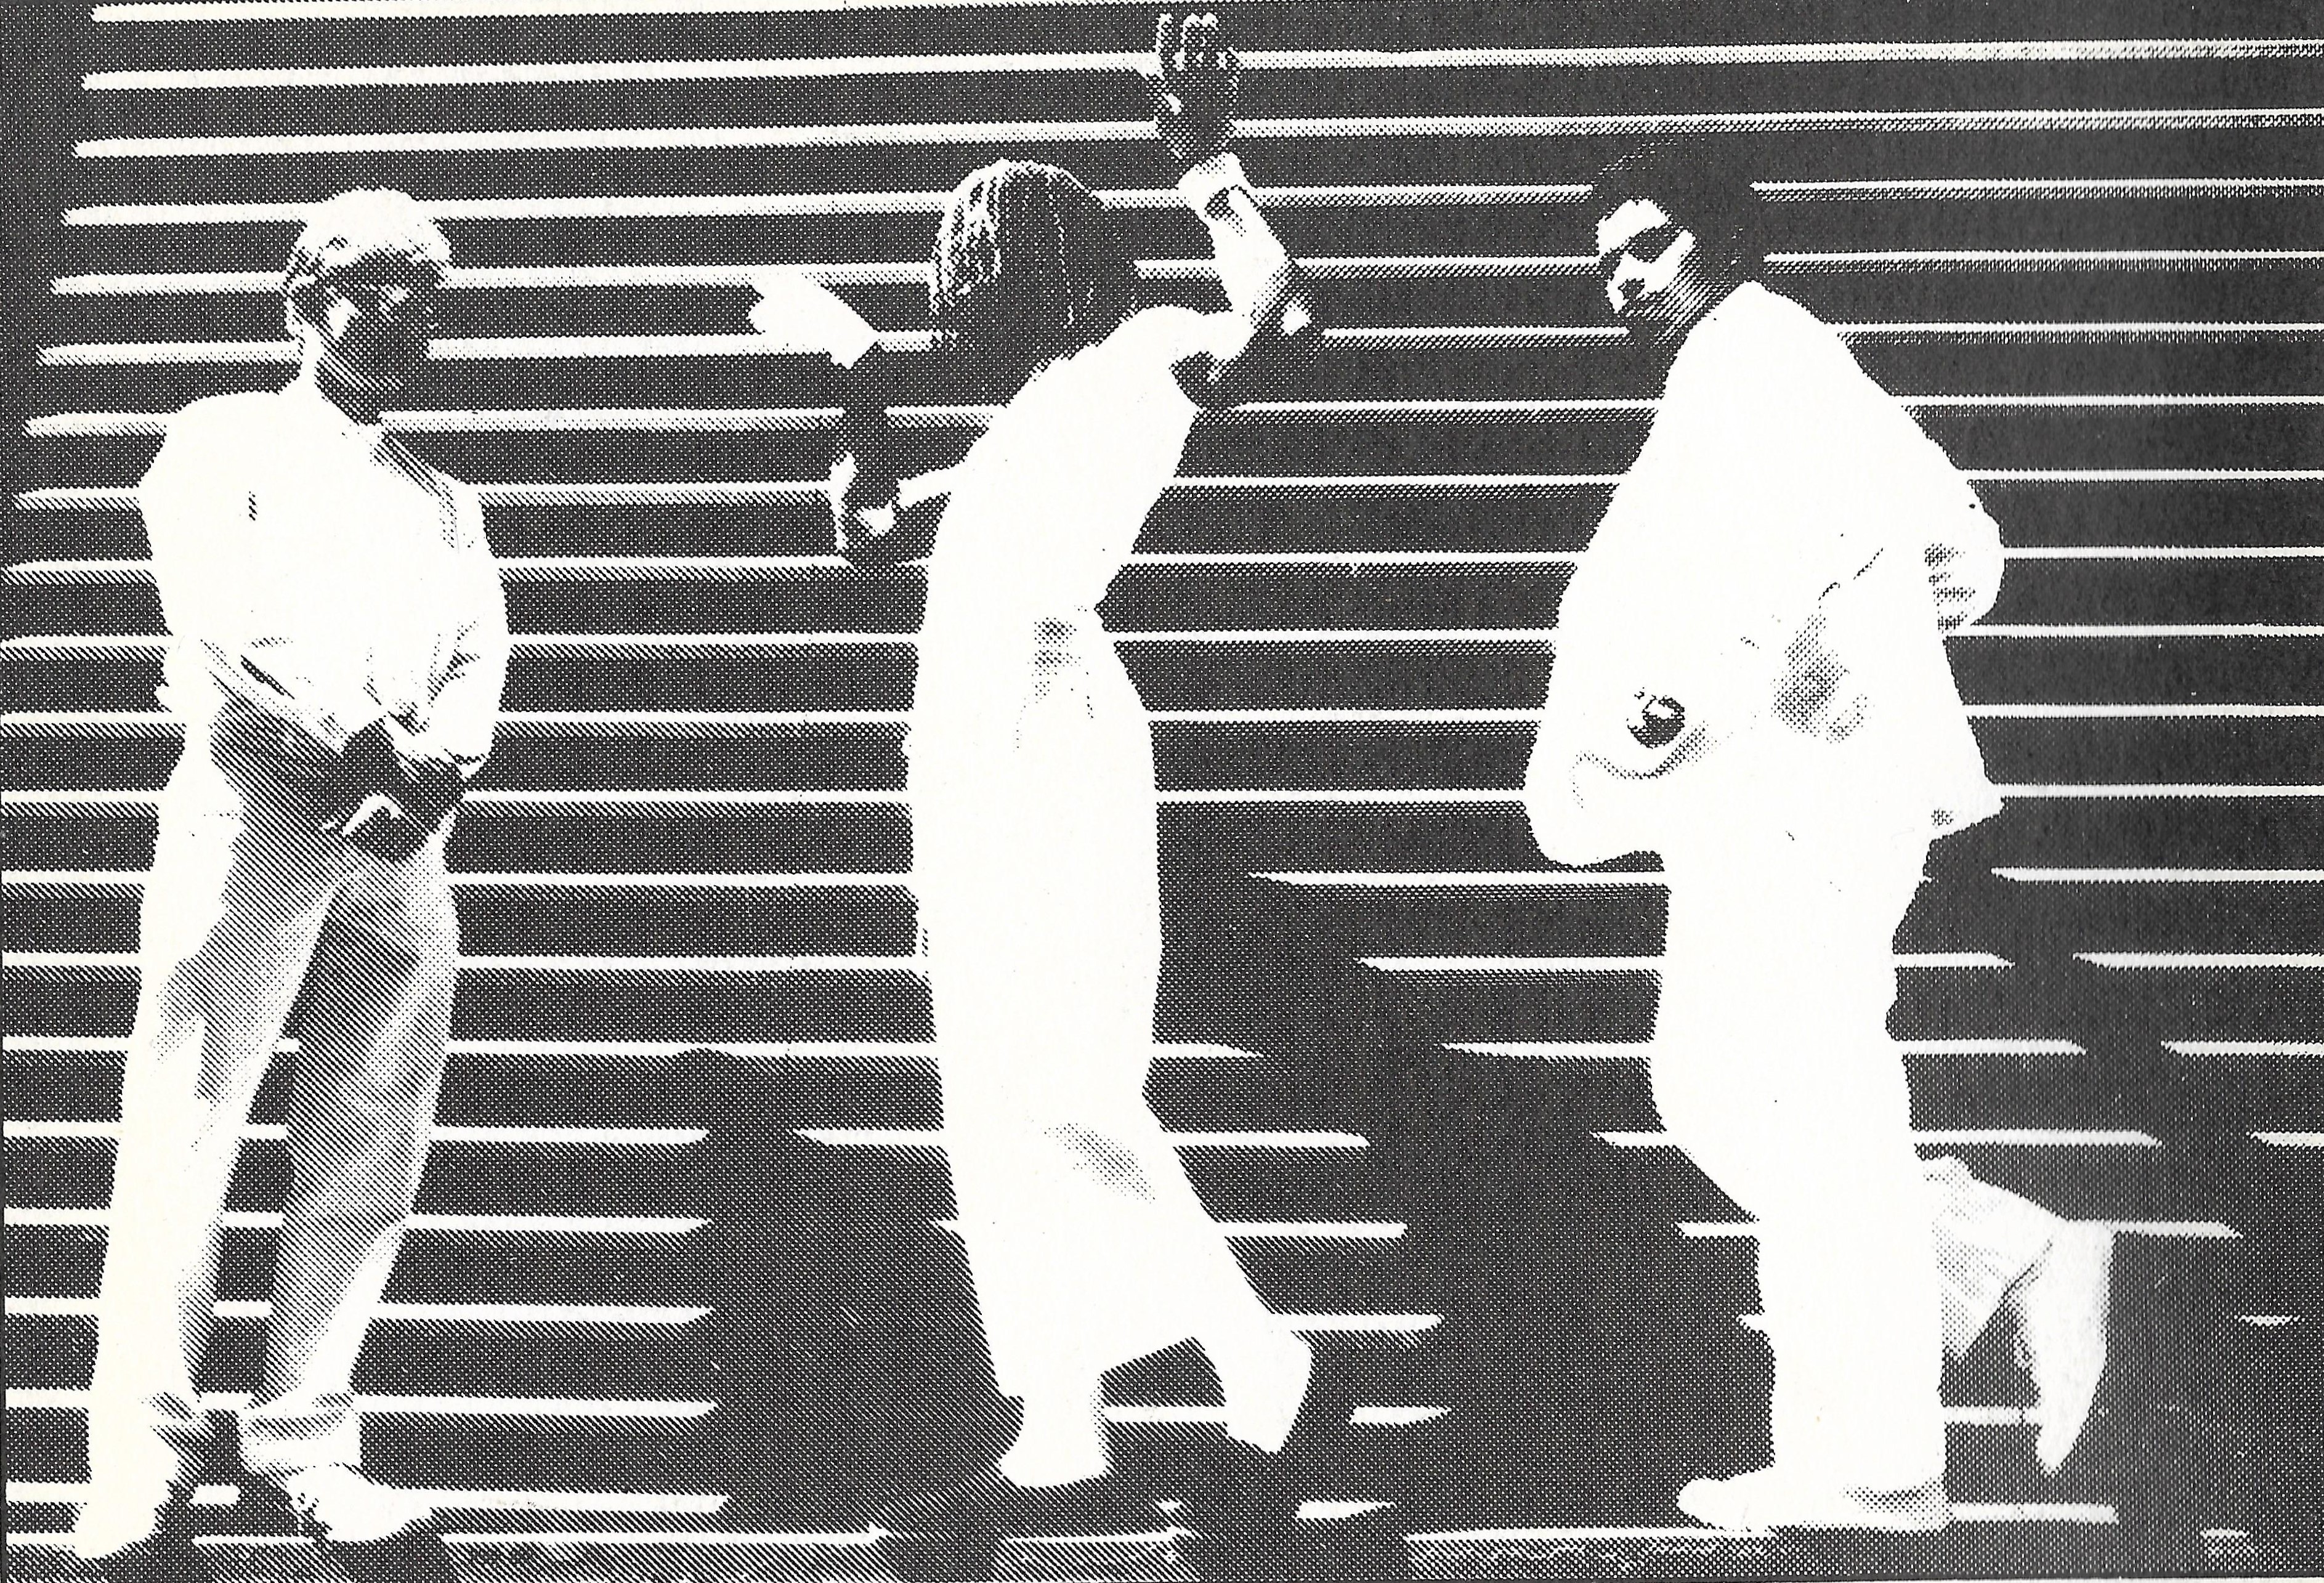 Original ONO members Ric Graham, travis, and P.Michael pose in a black-and-white image printed in a libretto containing travis's lyrics that accompanied the 1982 release of the album Kate Cincinnati. Courtesy of ONO.